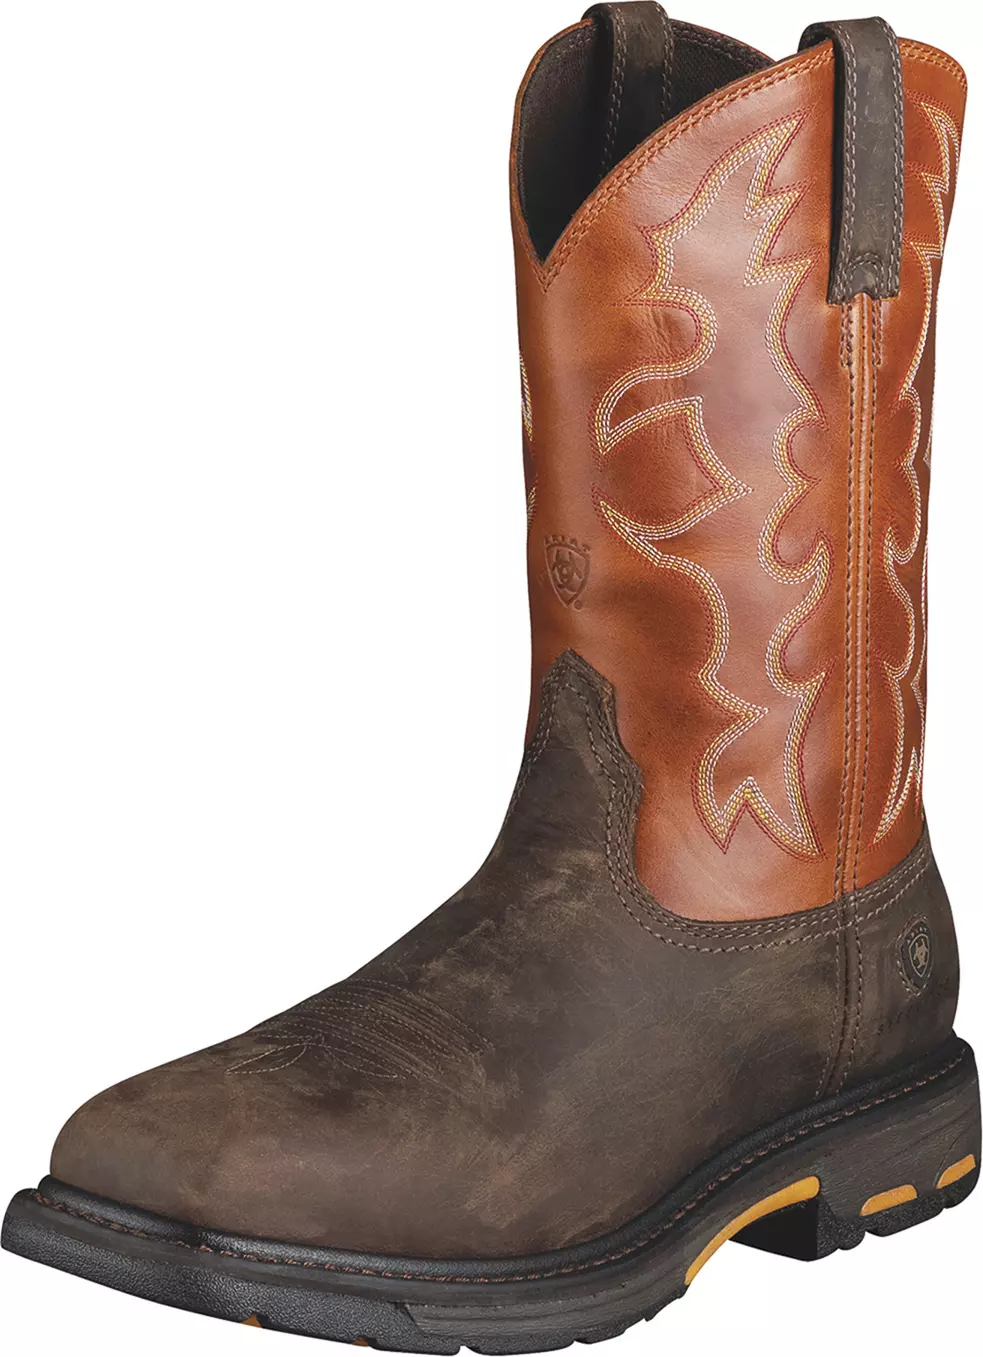 Ariat Men's Workhog Wide Square Toe Work Boot STYLE 10005888